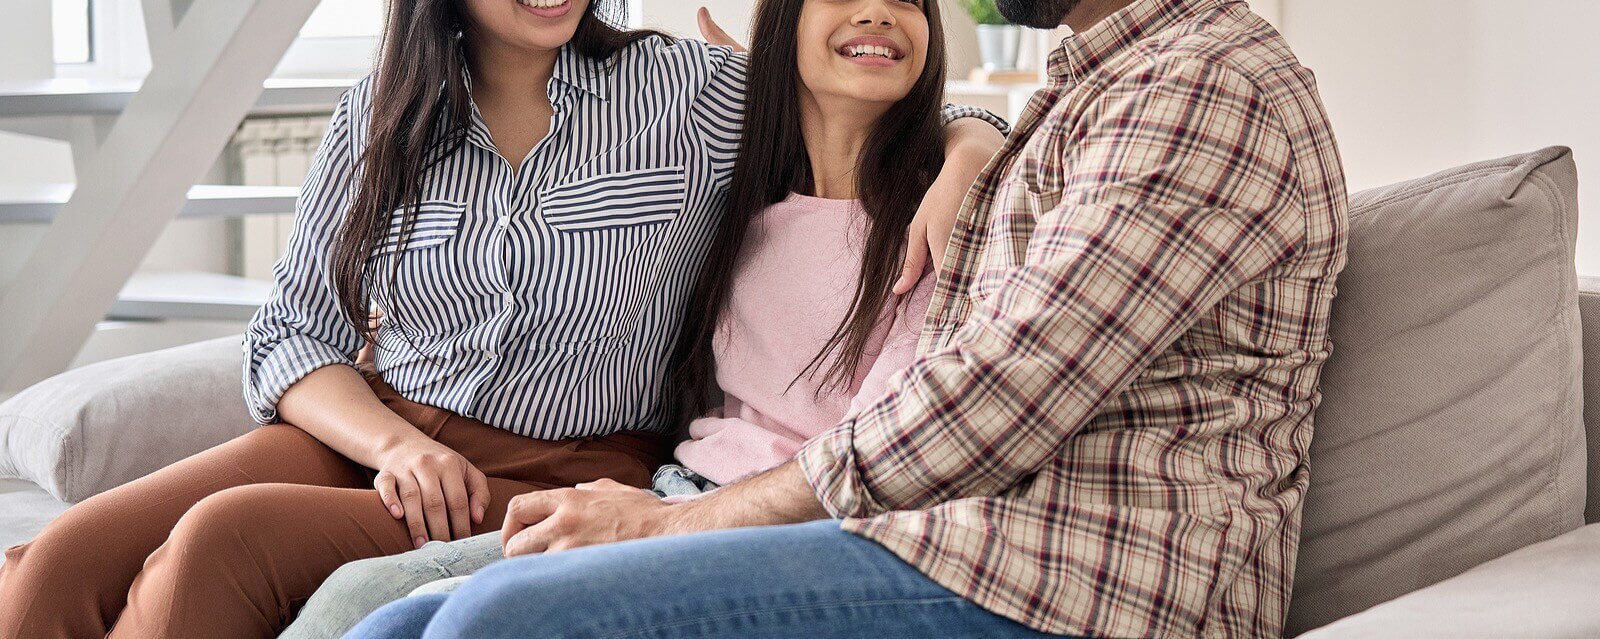 A family sits together on a couch. Looking for parental support as Anxious parents in Arlington, MA? Speak with a therapist to see if Therapy for Teens will provide you the support you need as a parent.